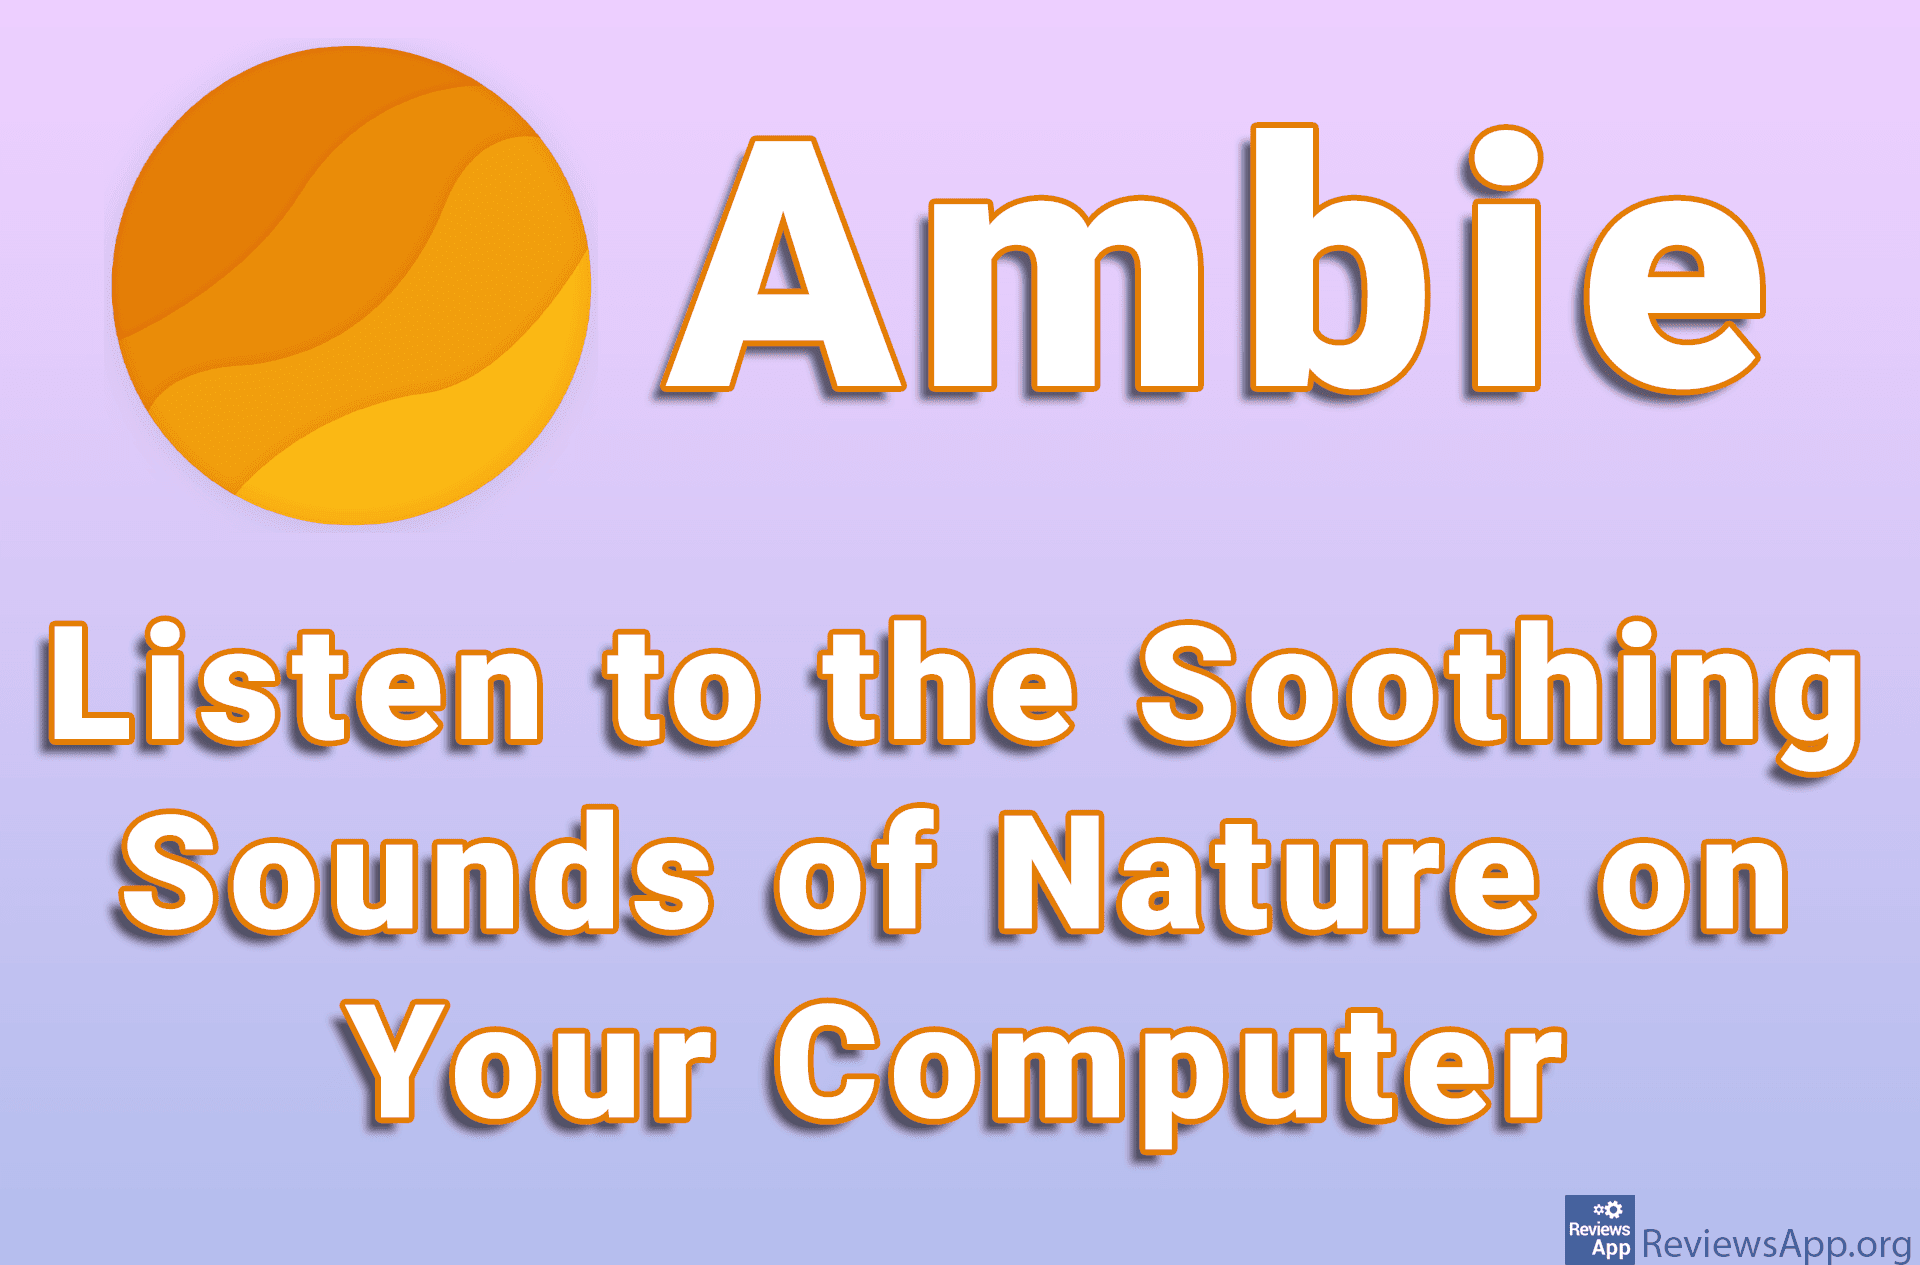 Ambie – Listen to the Soothing Sounds of Nature on Your Computer